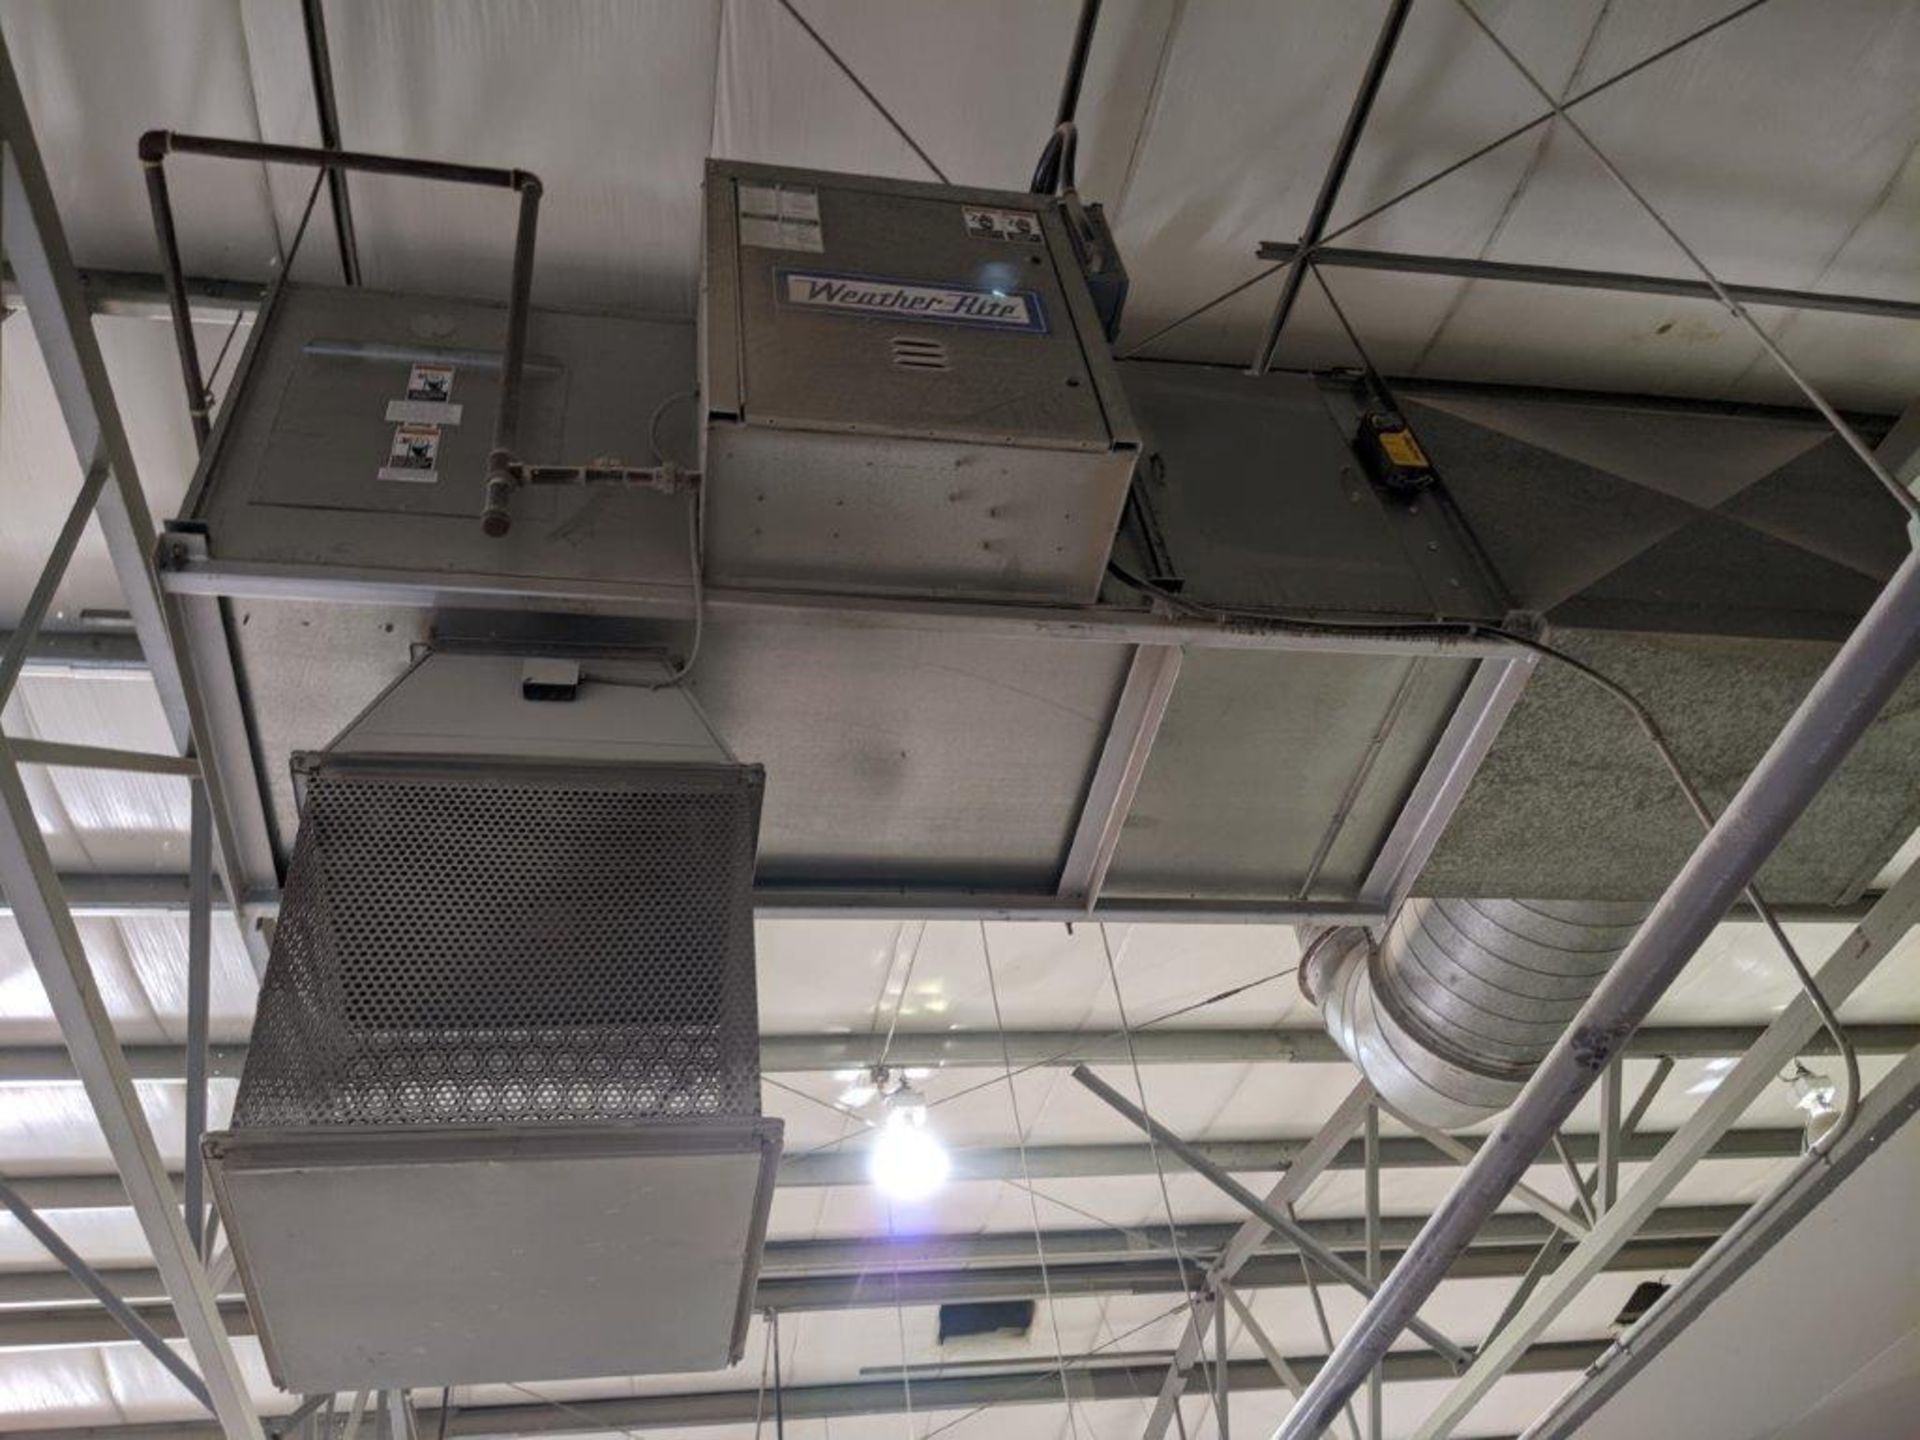 WEATHER-RITE INDOOR/OUTDOOR 9000 CFM NATURAL GAS MAKE-UP AIR UNIT W/ ROOF FAN LOCATED IN SYLVAN - Image 2 of 4